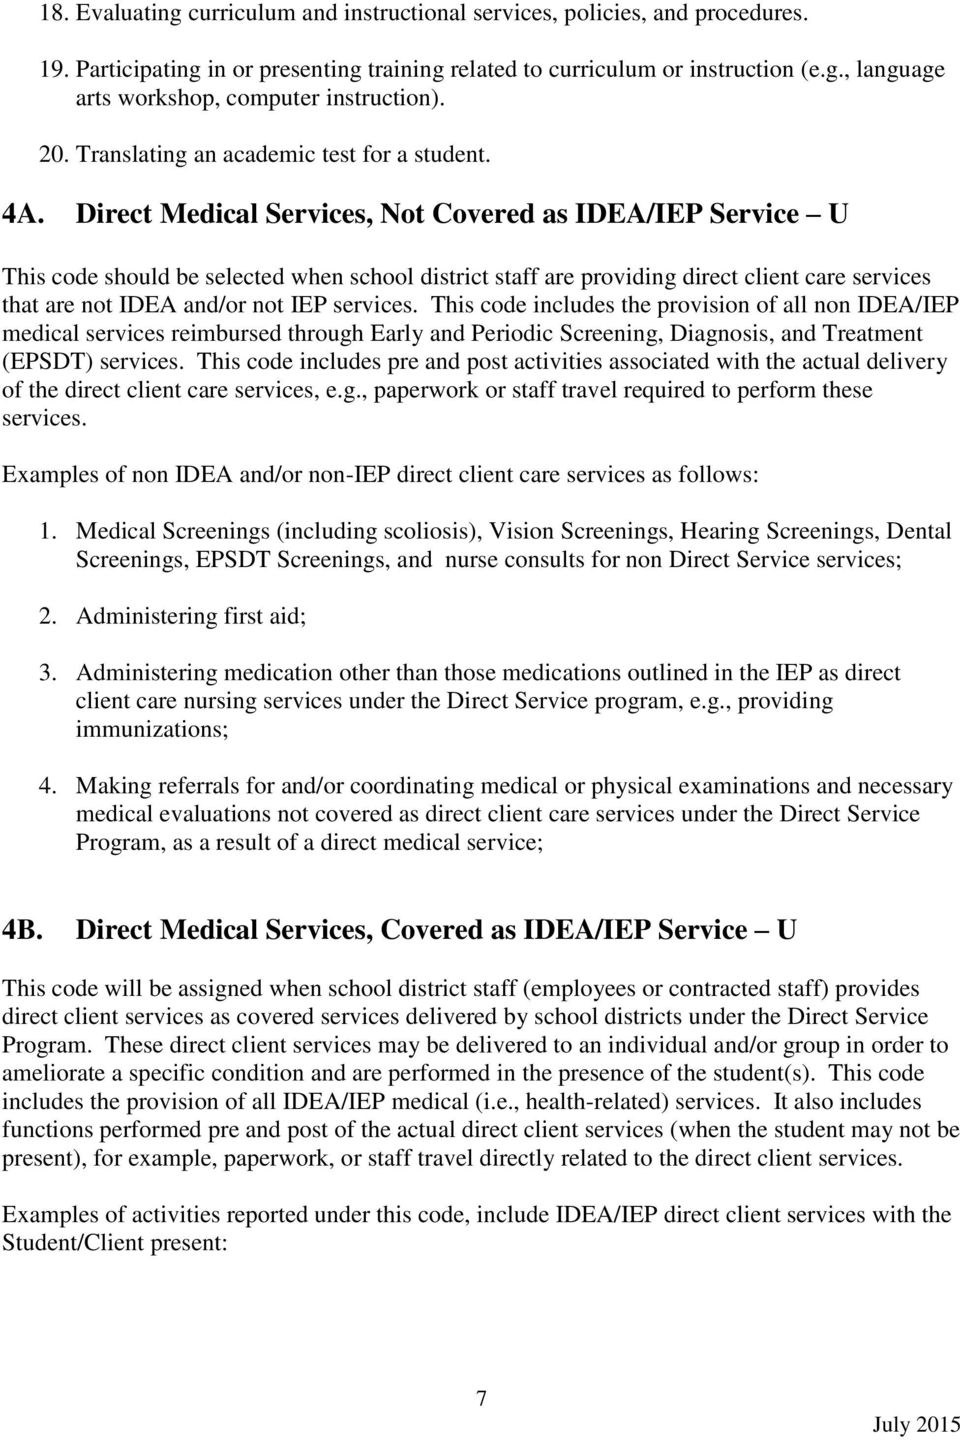 Direct Medical Services, Not Covered as IDEA/IEP Service U This code should be selected when school district staff are providing direct client care services that are not IDEA and/or not IEP services.